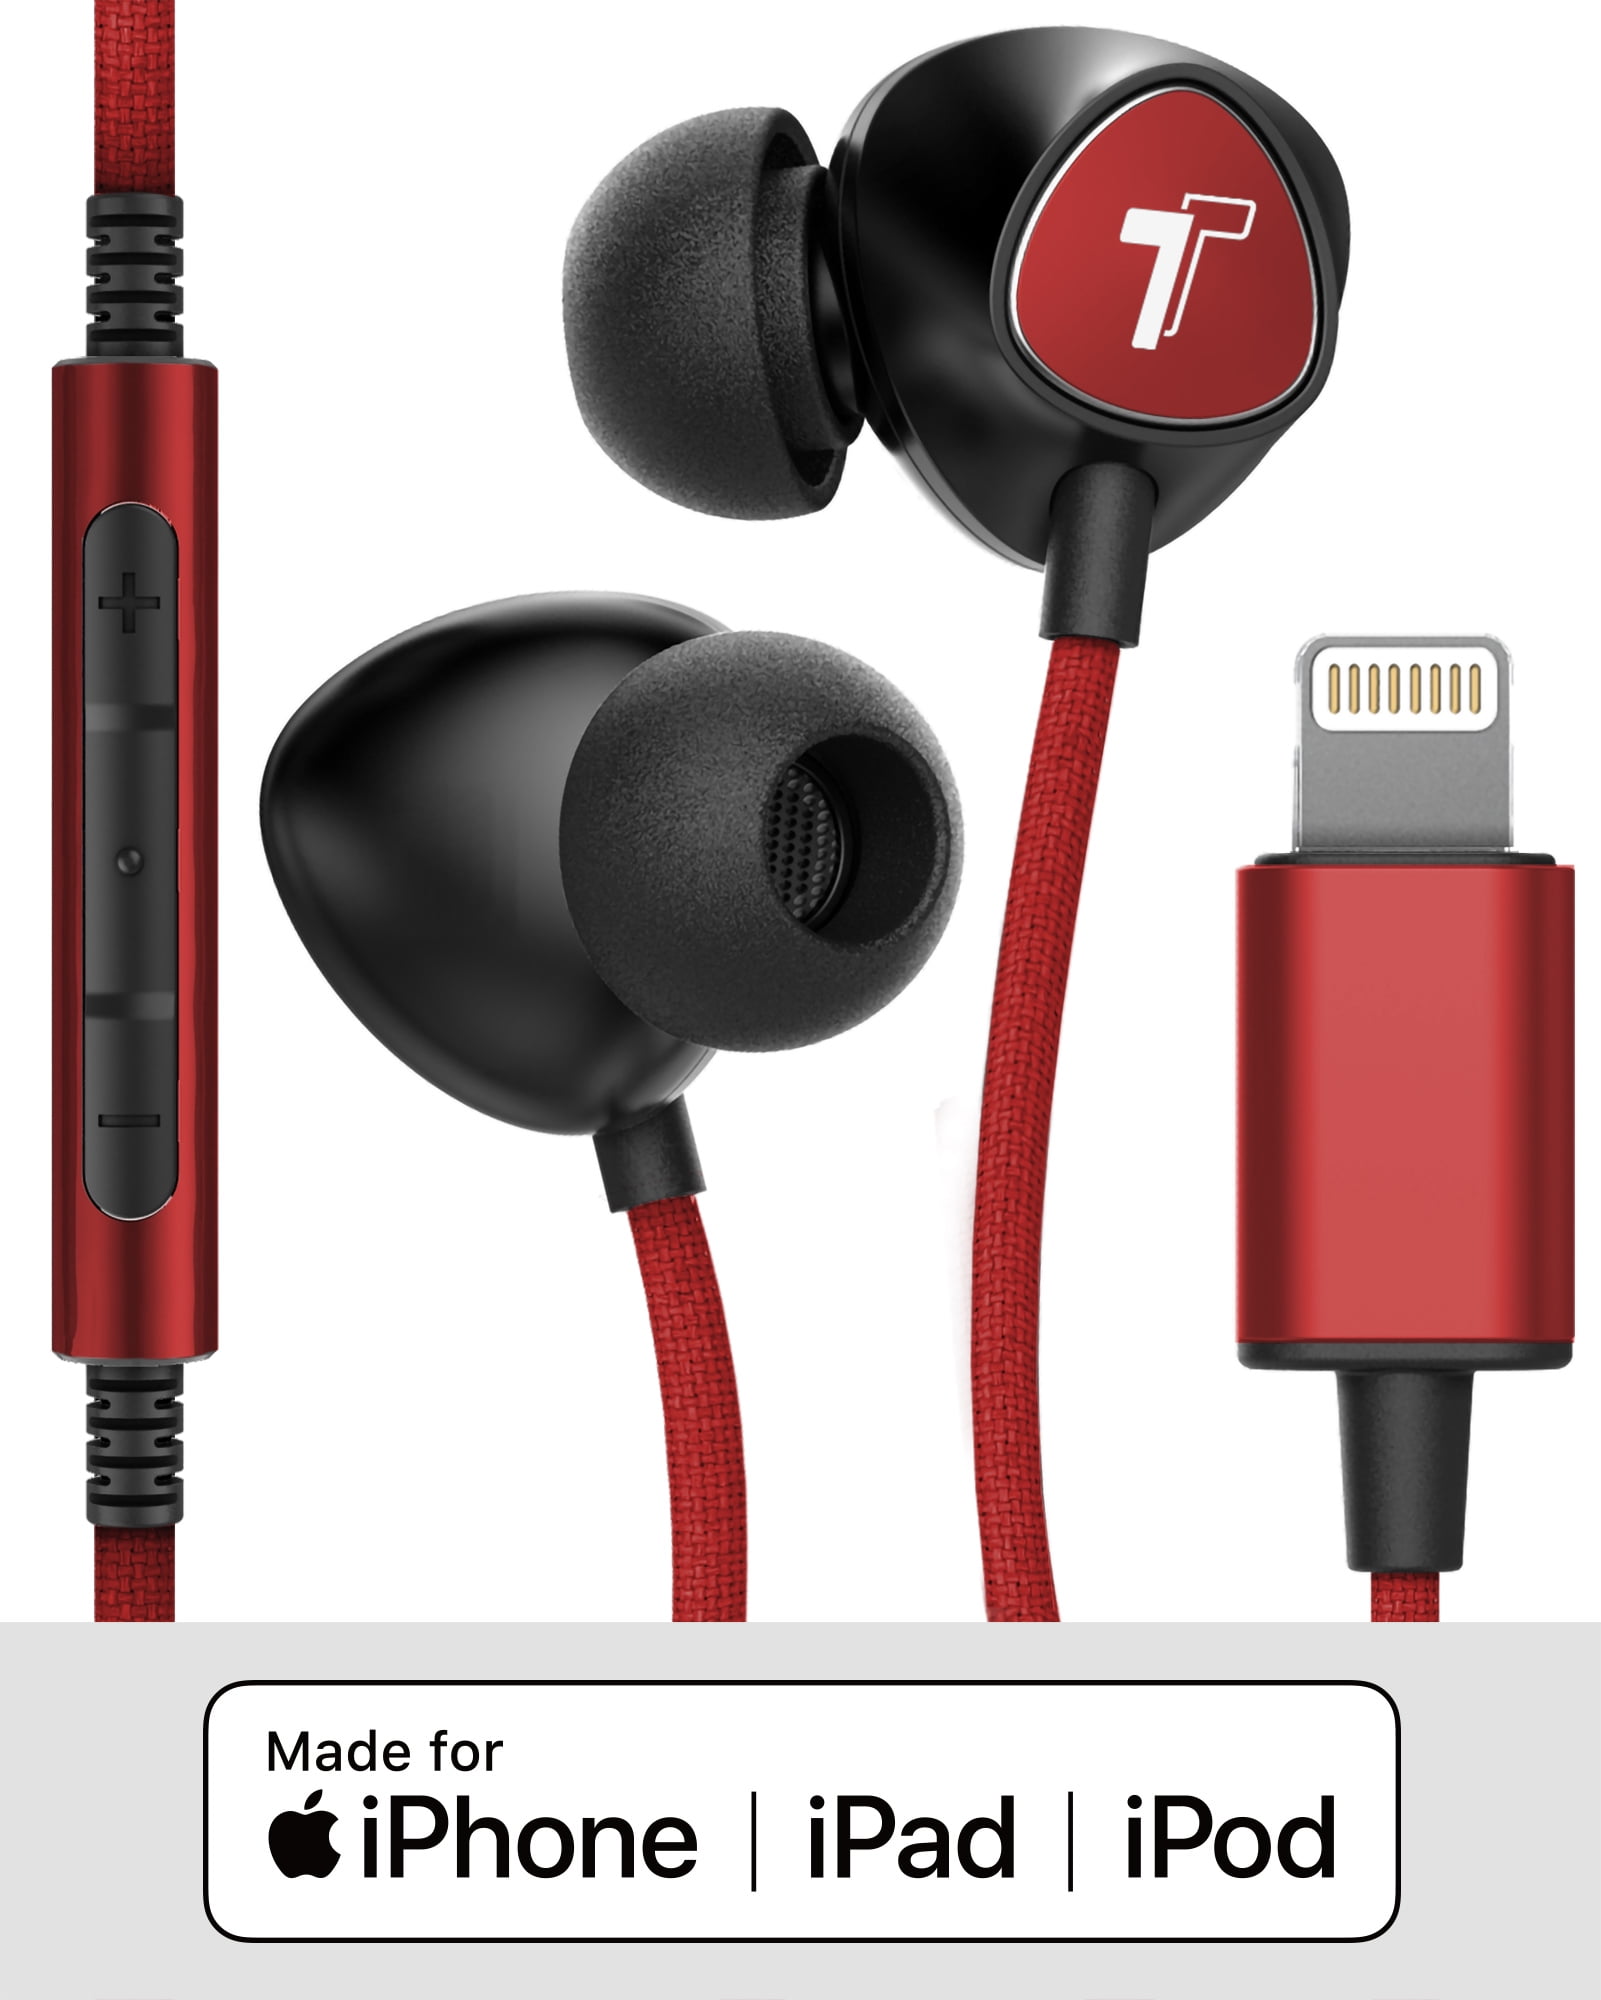 orkester Rusten Visne Thore Braided iPhone Earphones (Apple MFi Certified) V110 In Ear Wired  Lightning Earbuds (Sweat/Water Resistant) Headphones with Mic/Volume Remote  for iPhone XR/Xs Max/7/8 Plus/11/Pro Max - Red - Walmart.com